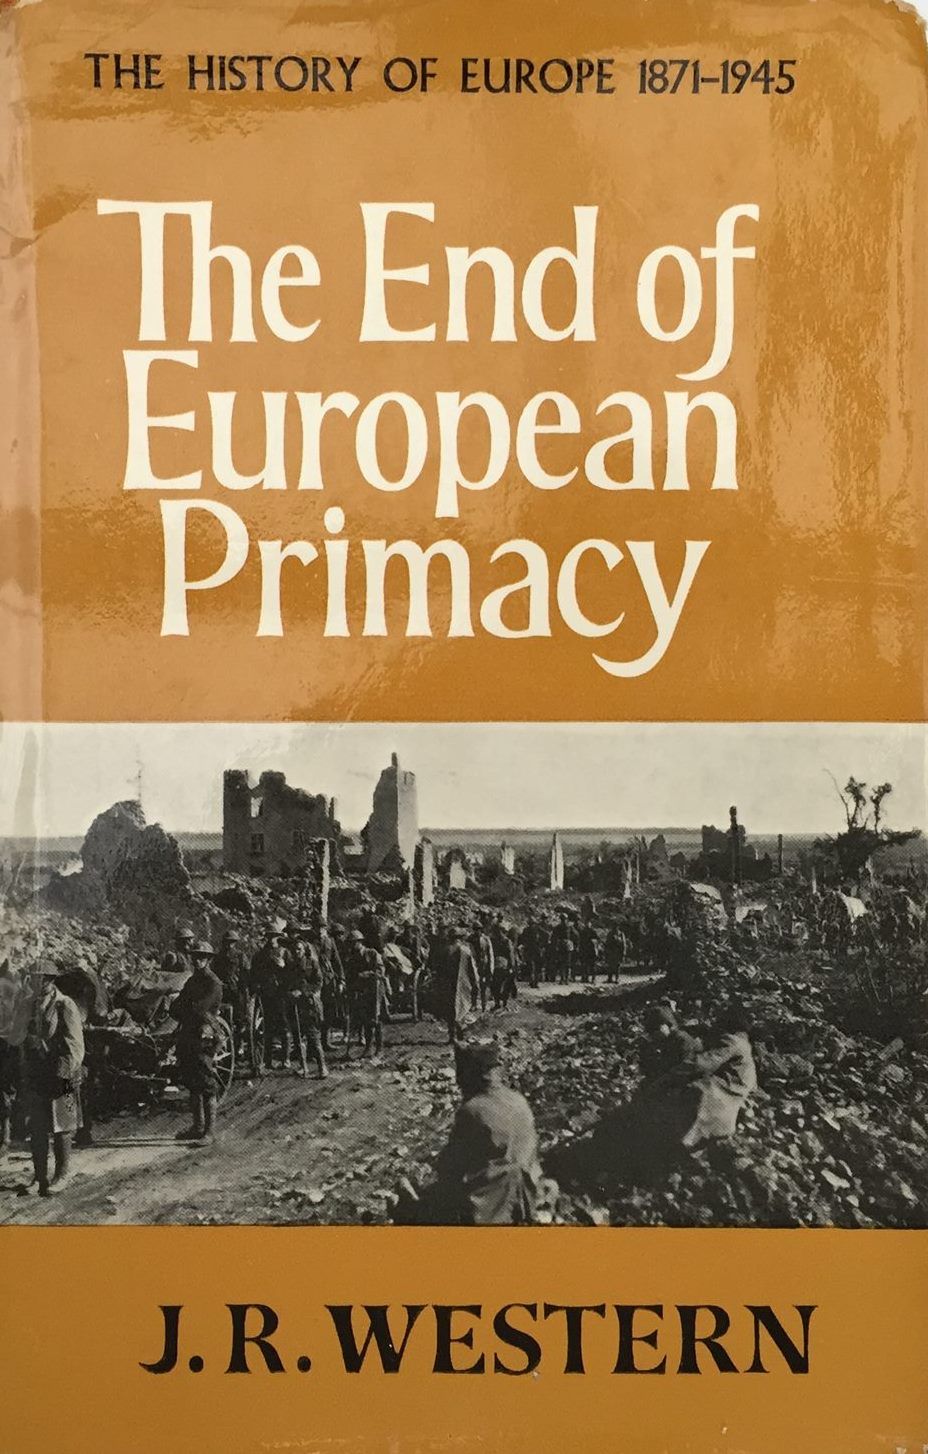 THE END OF EUROPEAN PRIMACY: The History of Europe 1871-1945